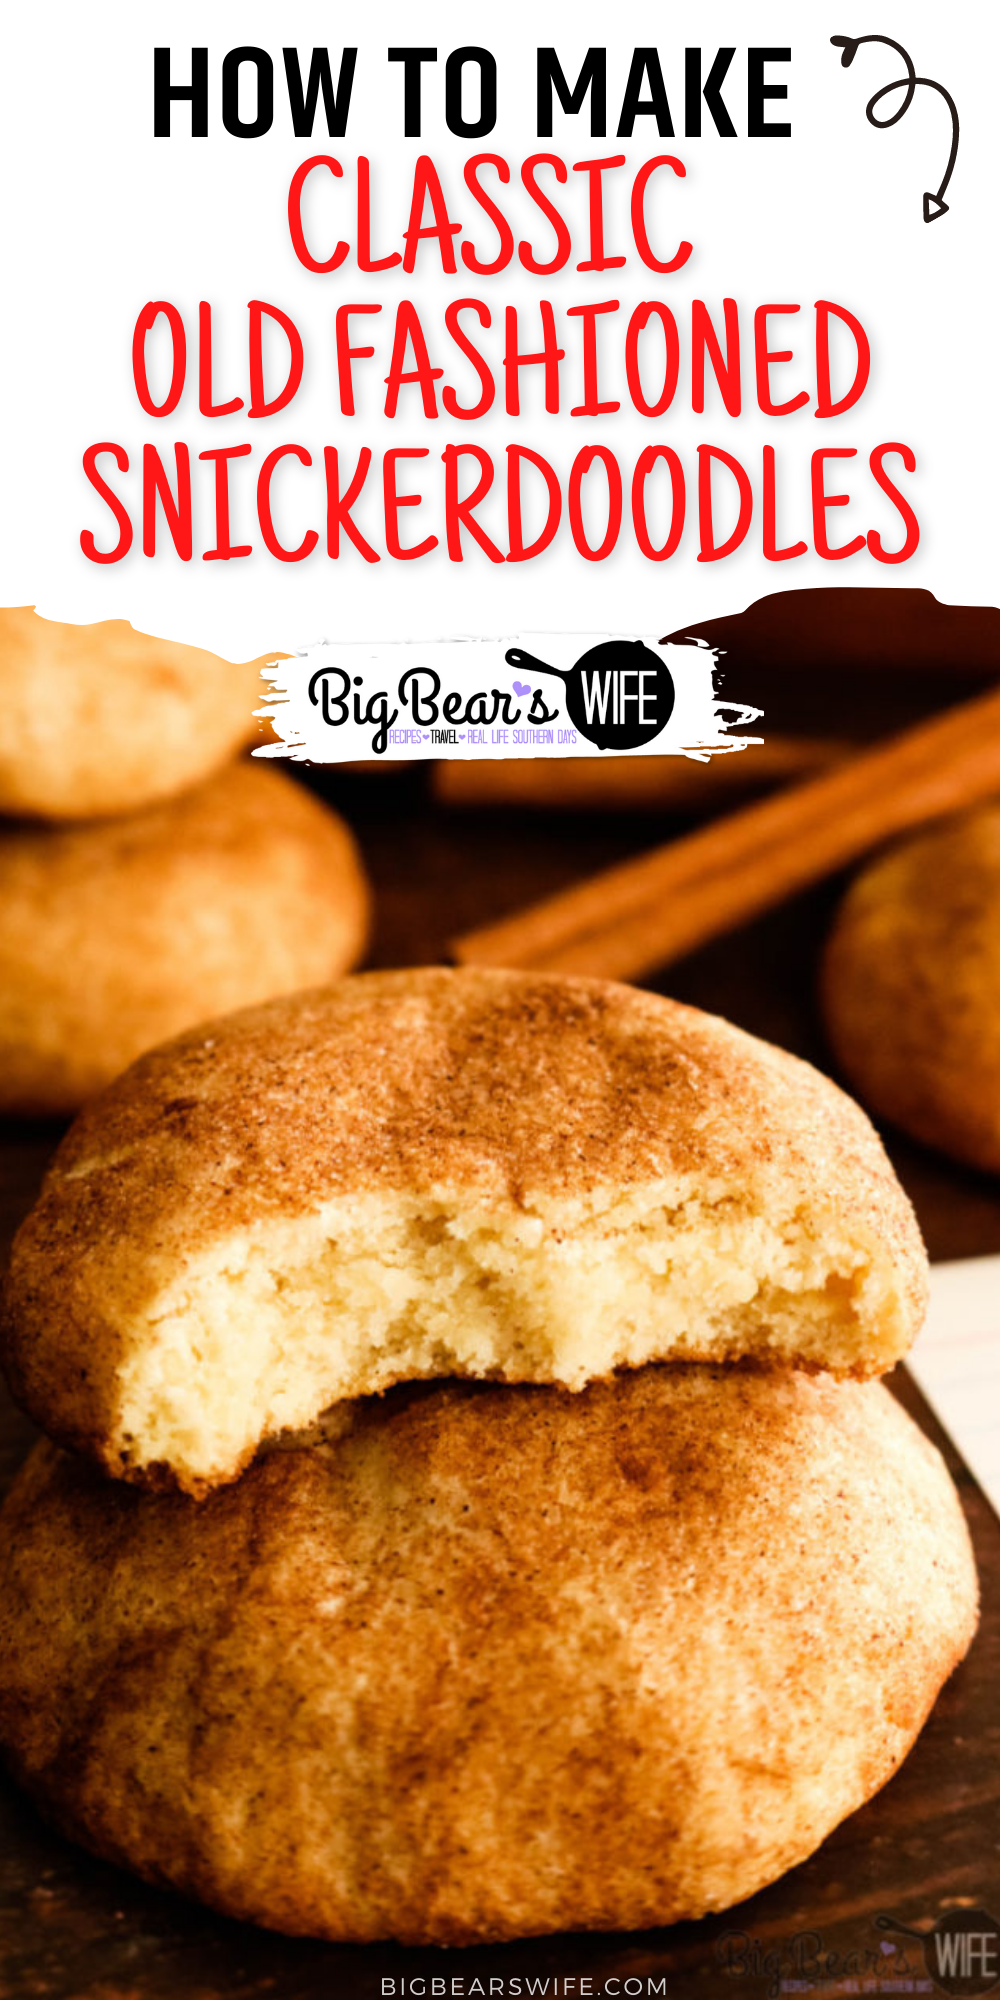 Classic Old Fashioned Snickerdoodles - Classic Old Fashioned Snickerdoodles need to be a part of everyone's recipe box! Made with shortening and rolled in cinnamon sugar for a classic sweet bite!  via @bigbearswife